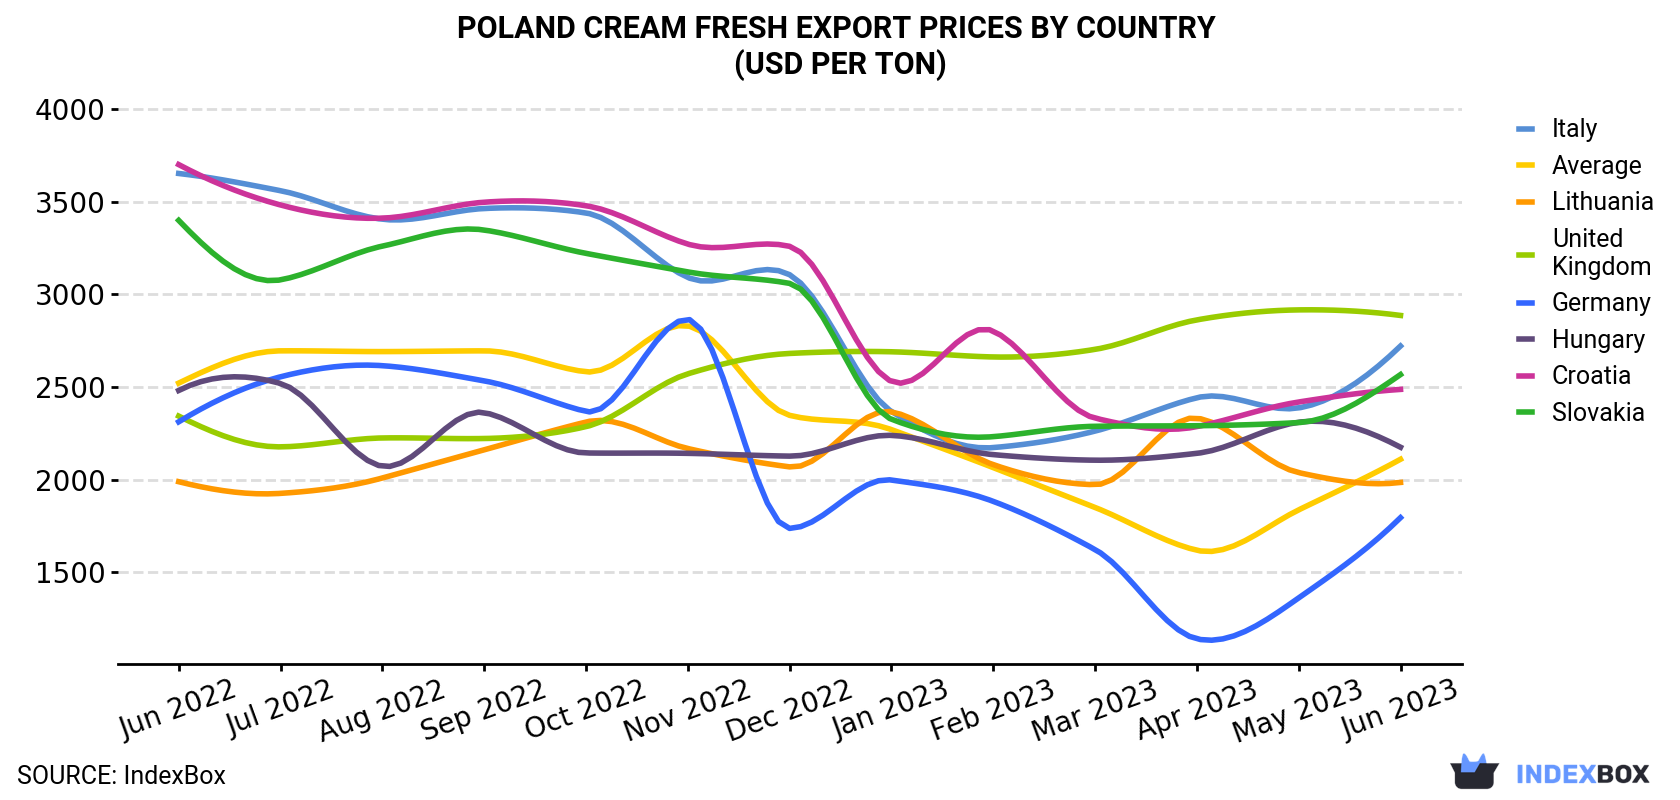 Poland Cream Fresh Export Prices By Country (USD Per Ton)